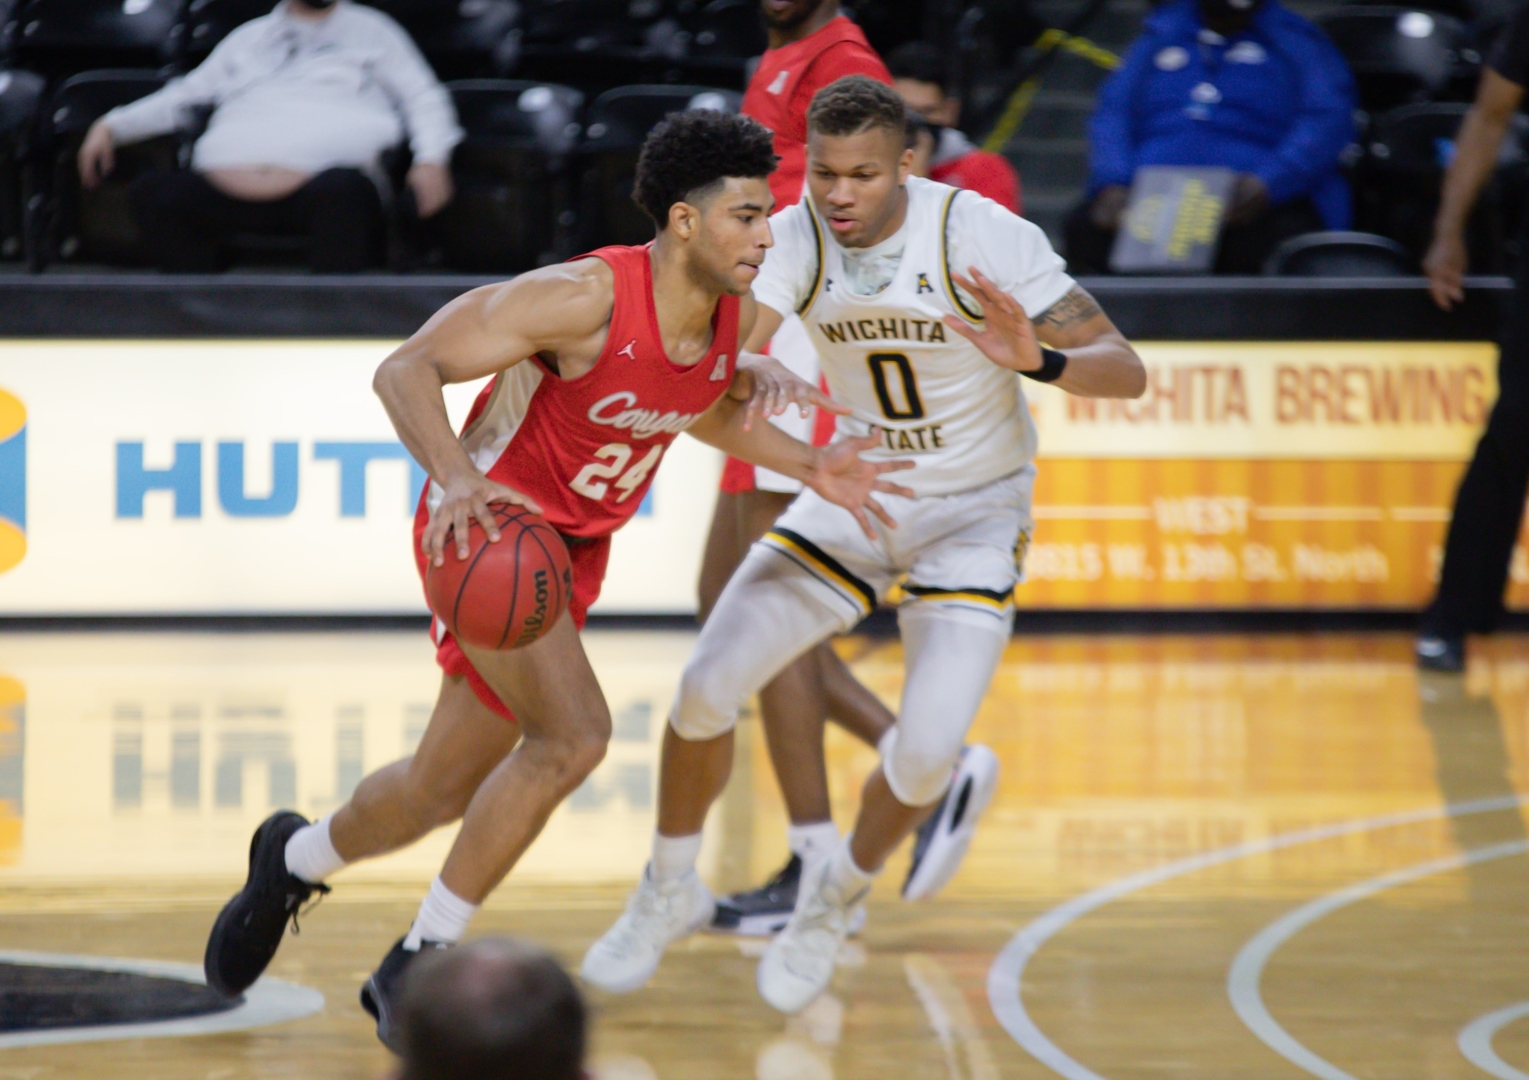 UH guard Quentin Grimes (24) drives past Wichita State guard Dexter Dennis (0) on Thursday at Charles Kock Arena. | Khanh Nguyen/The Sunflower